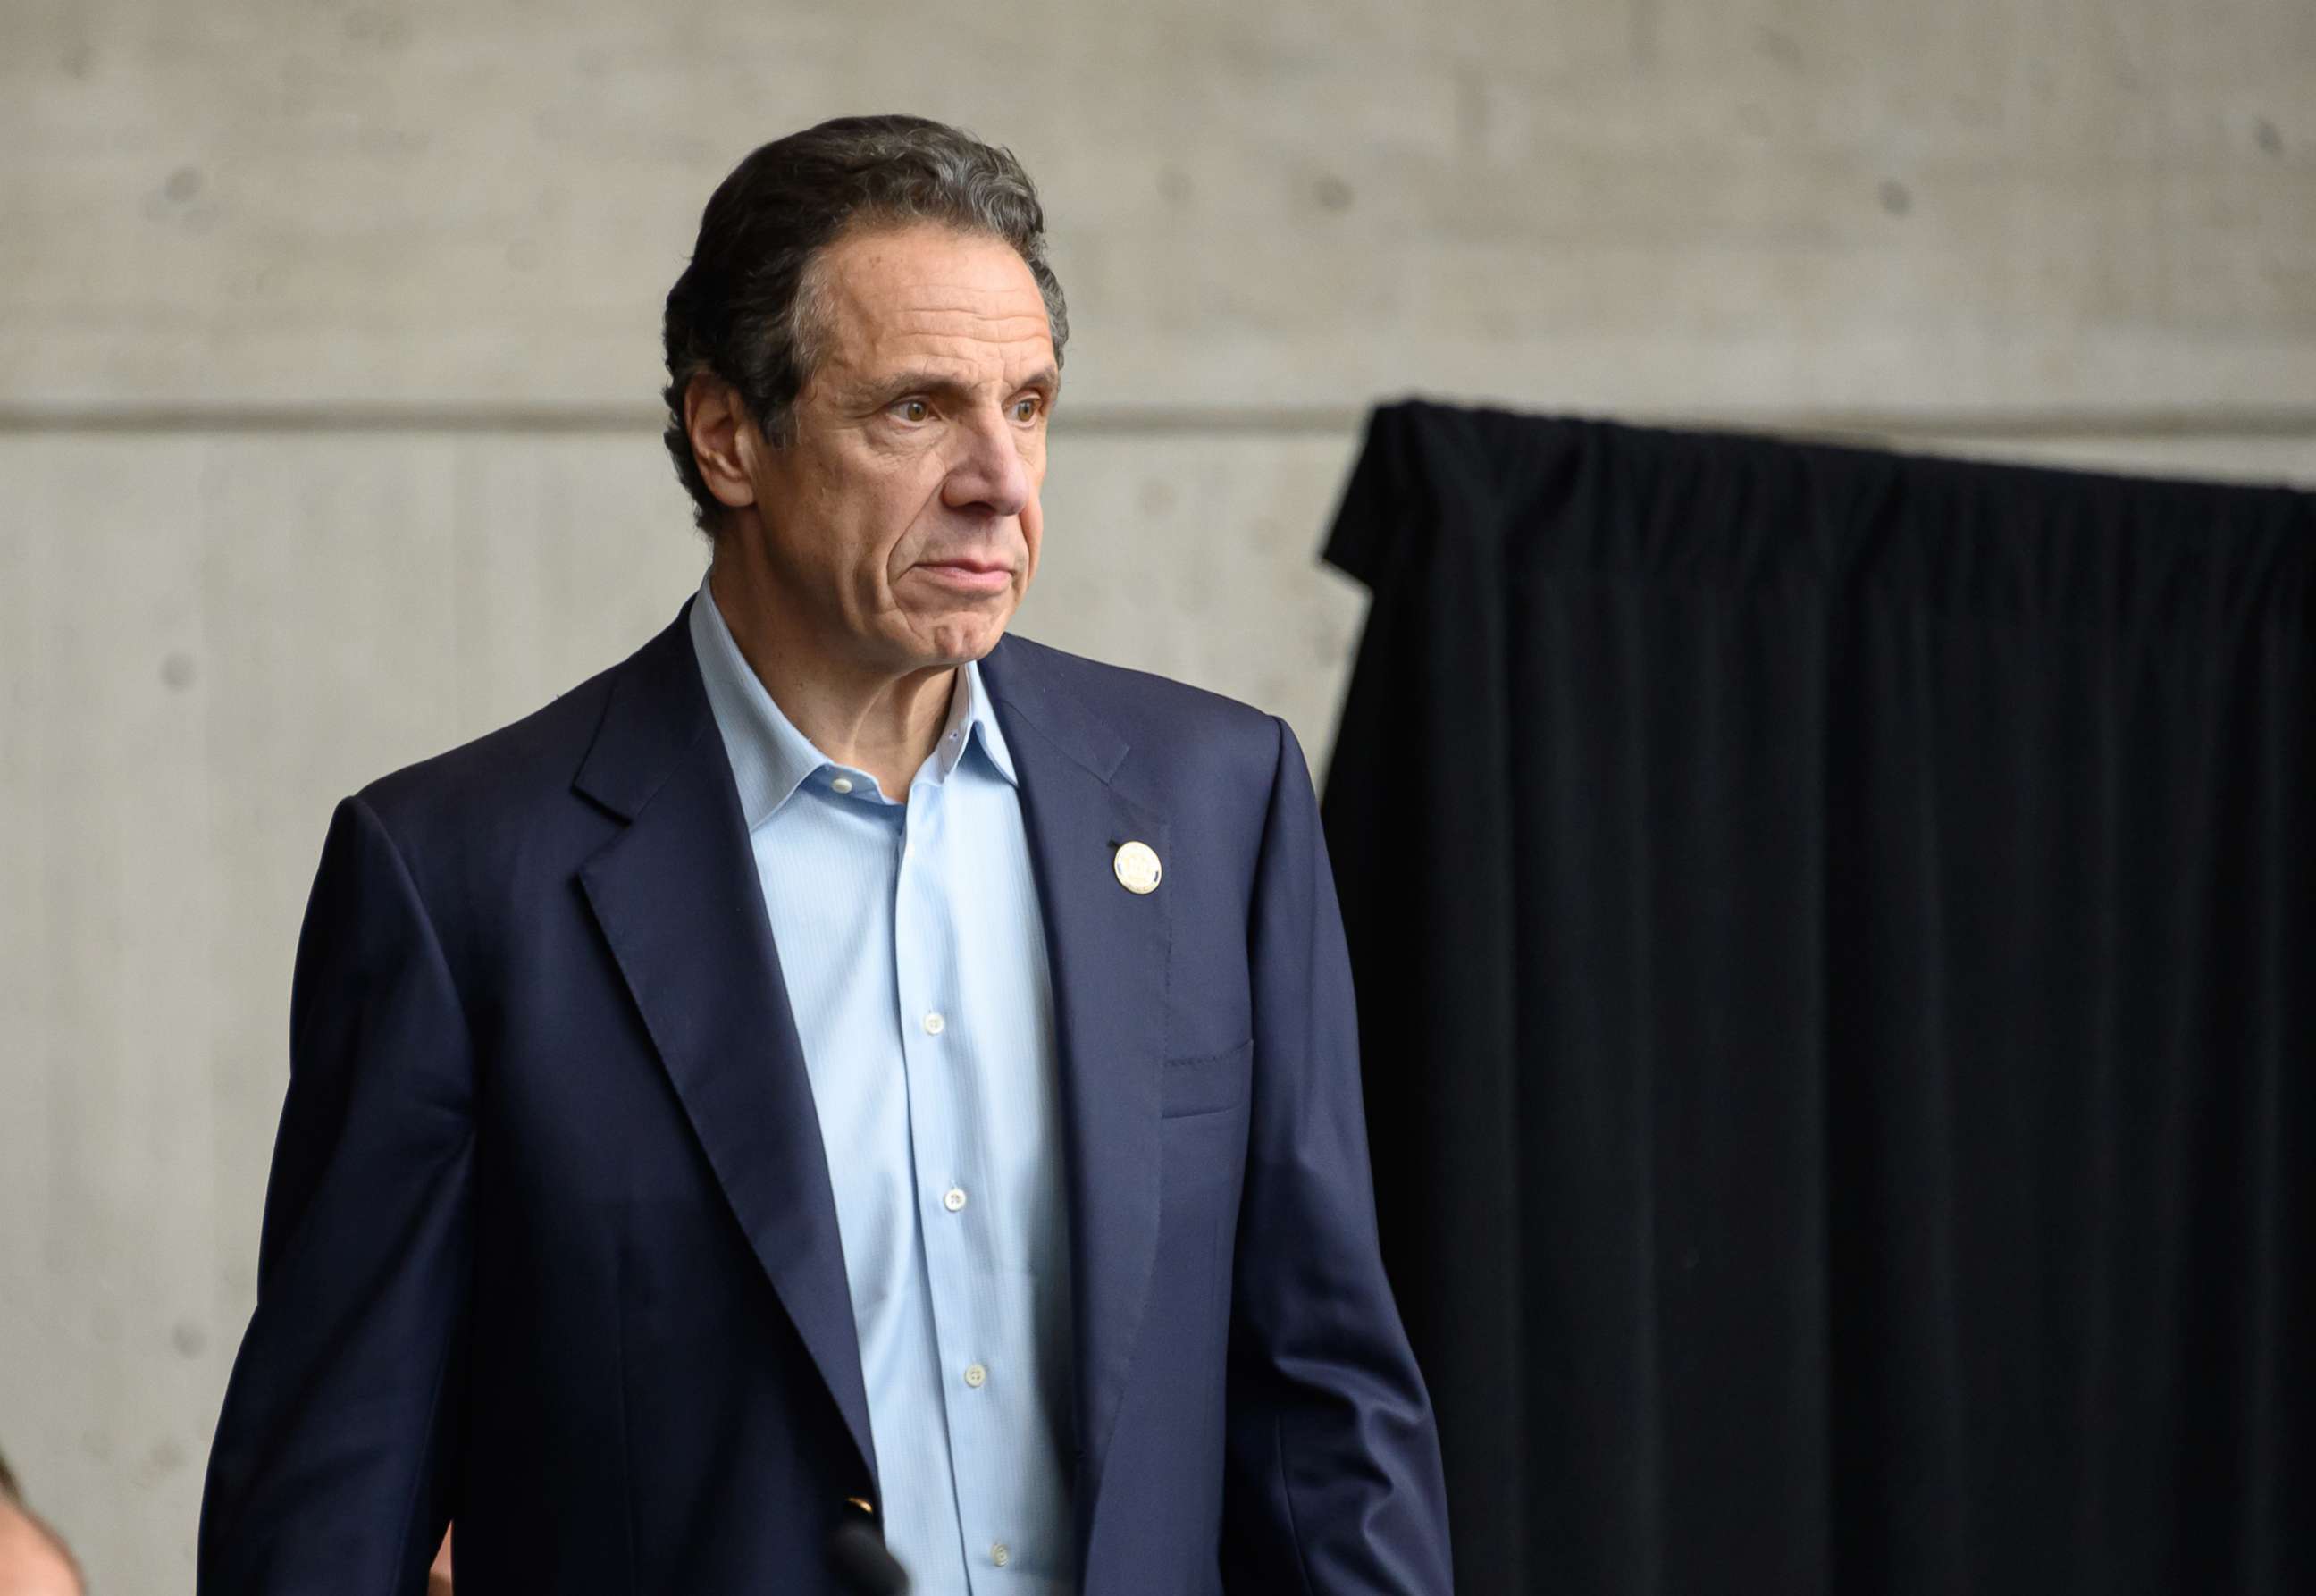 PHOTO: In this March 30, 2020, file photo, Governor Andrew Cuomo speaks during a news conference at the Jacob Javits Convention Center during the COVID-19 pandemic in New York.